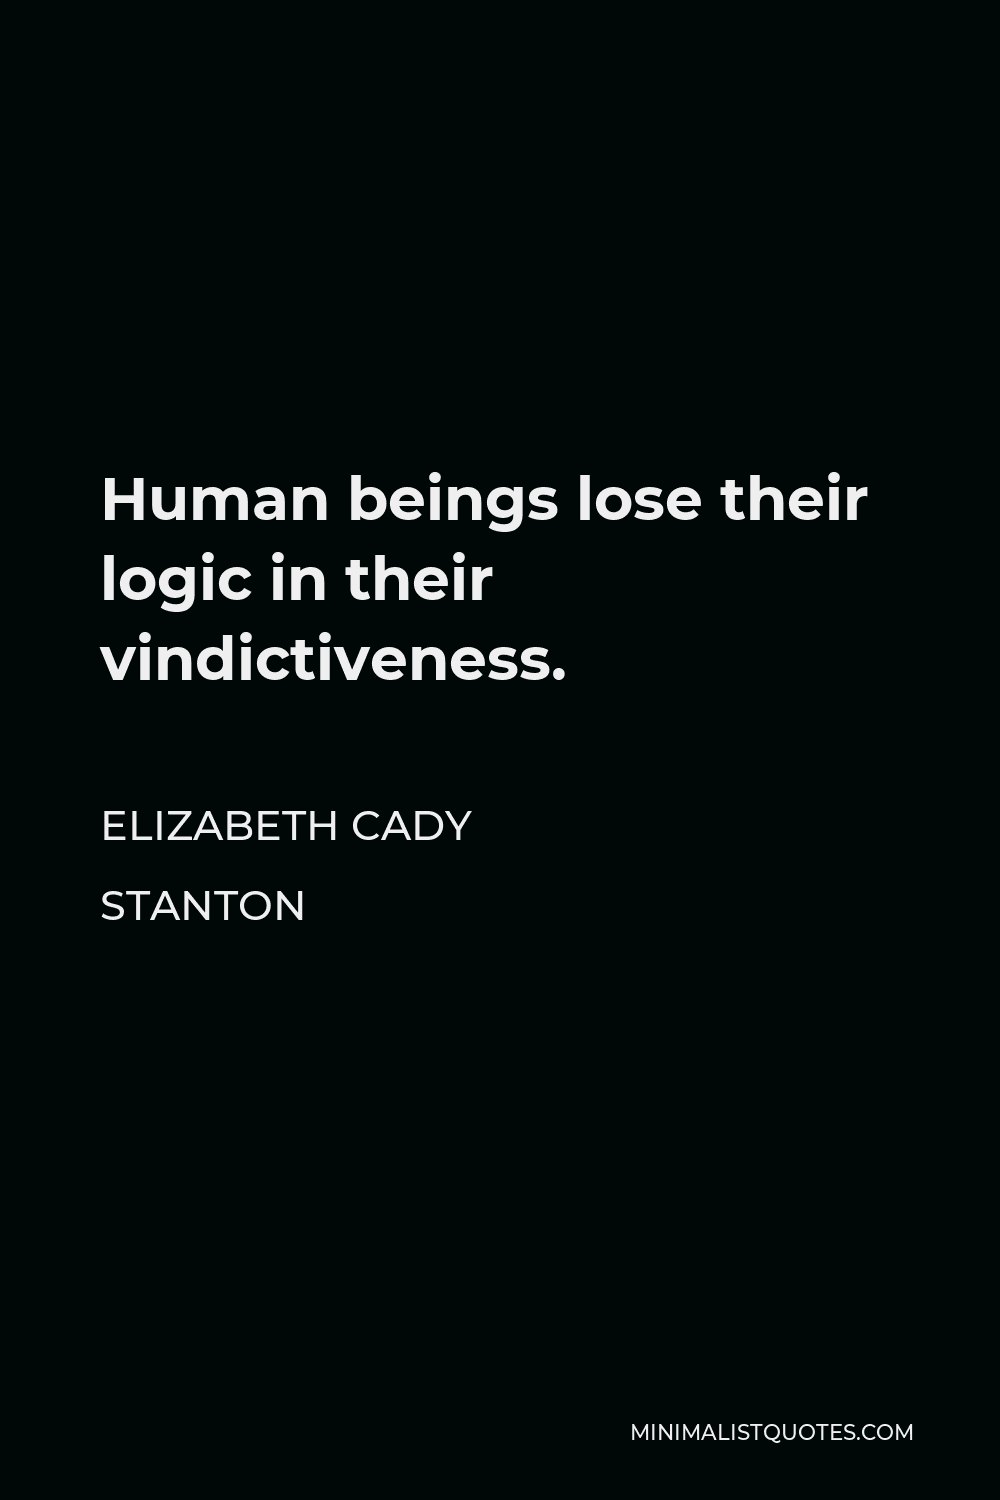 Elizabeth Cady Stanton Quote - Human beings lose their logic in their vindictiveness.